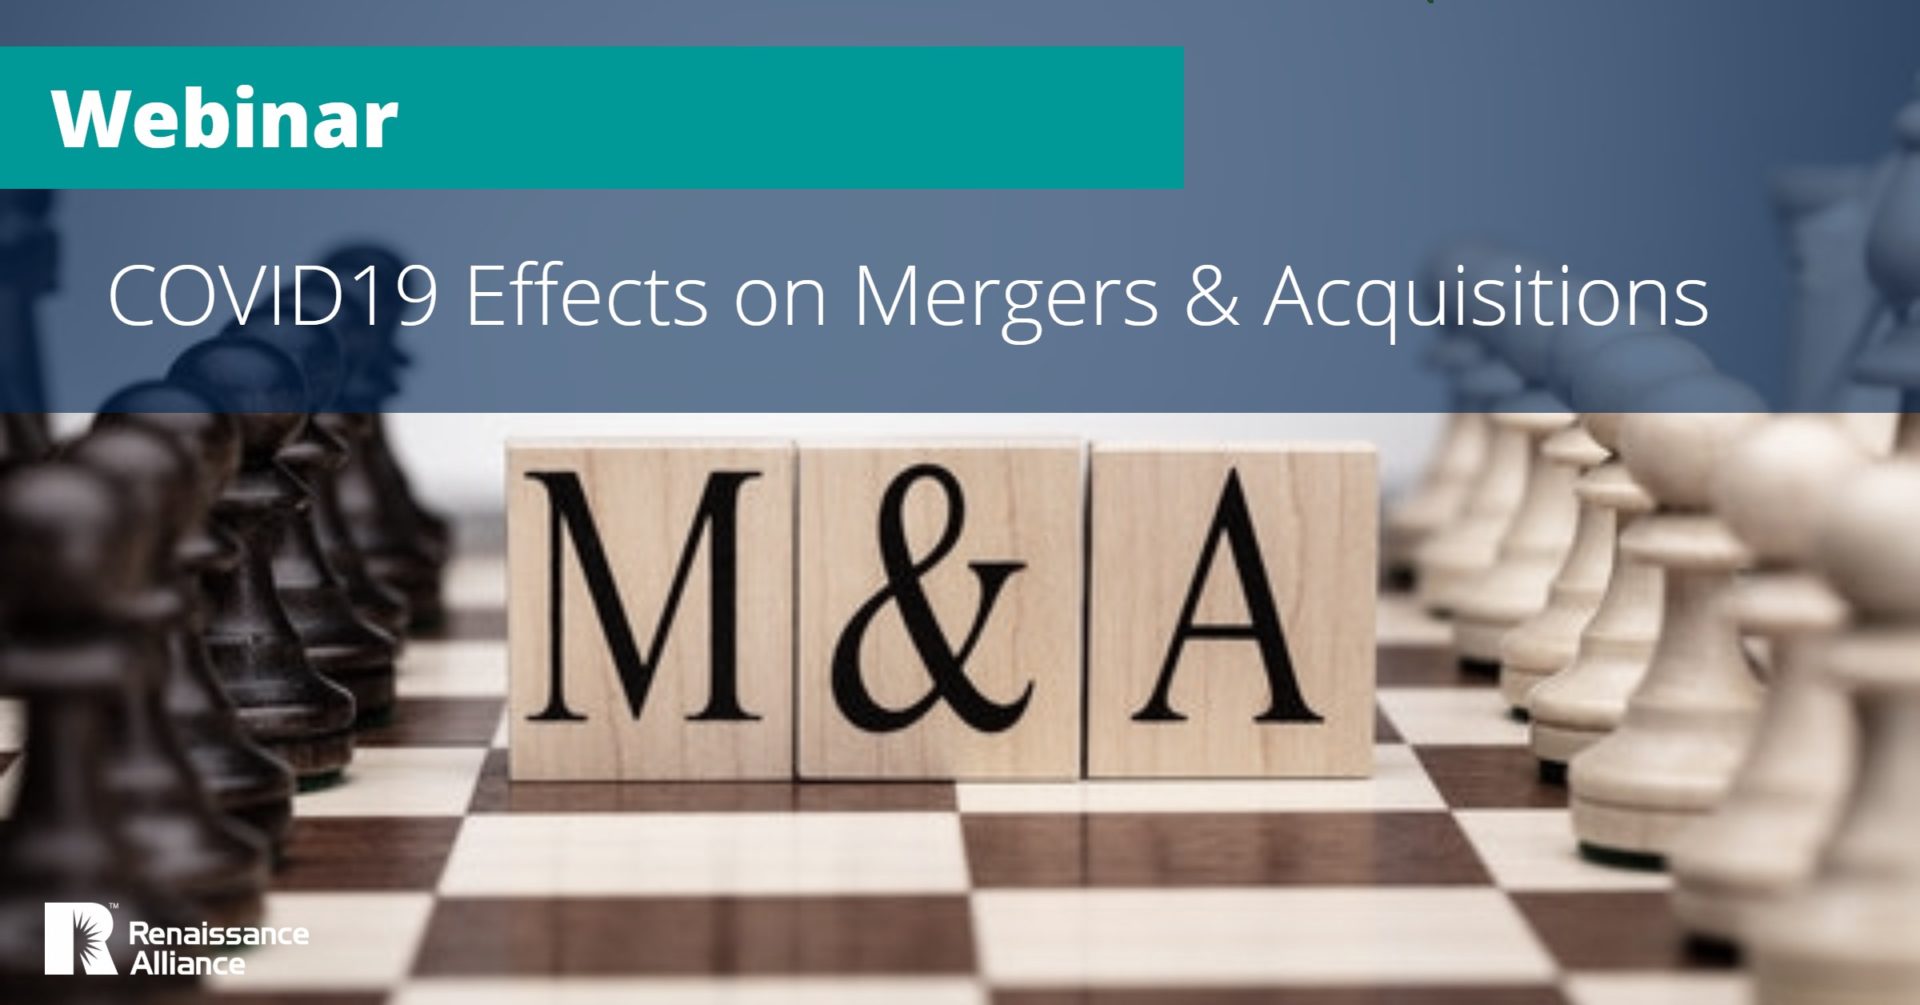 insurance agency mergers & acquisitions image